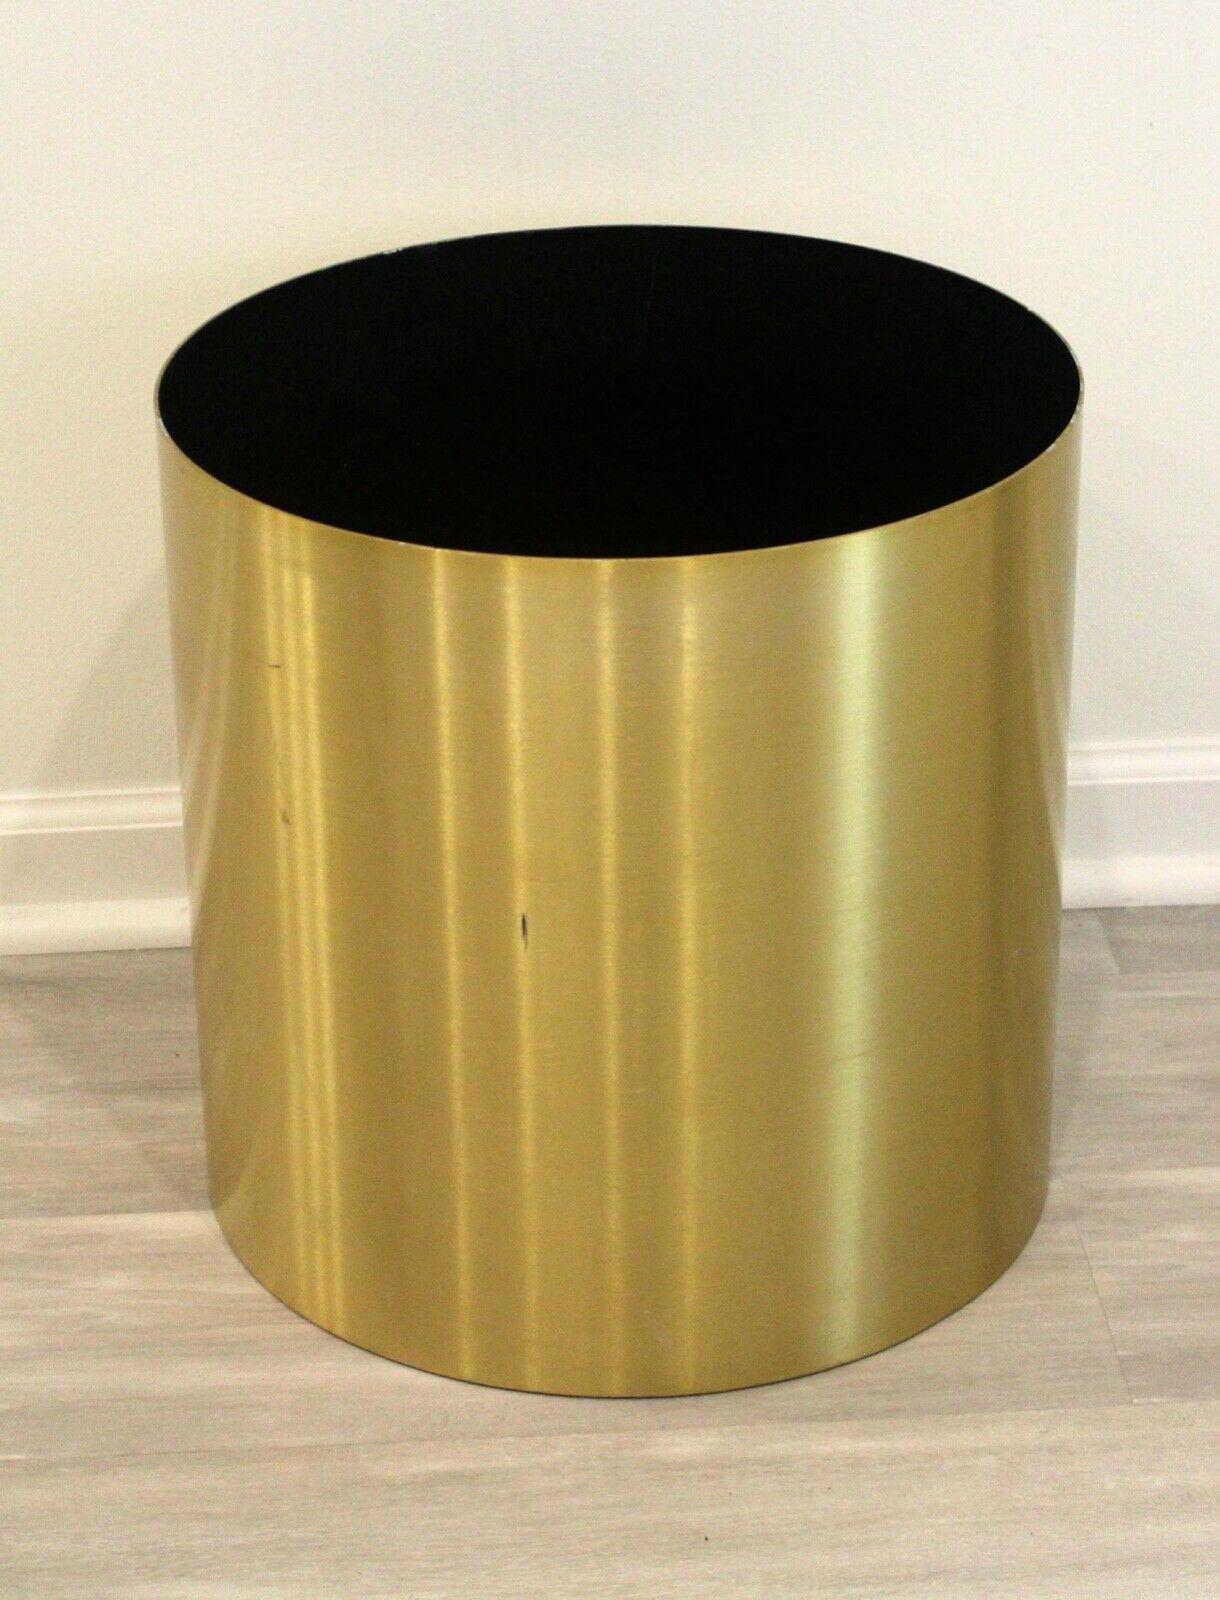 This drum planter by Paul Mayen accommodates larger scale foliage or trees. Made of brass, this modern and sleek planter works well in most modern and transitional homes.

Dimensions: 16.25 diameter x 16 height.